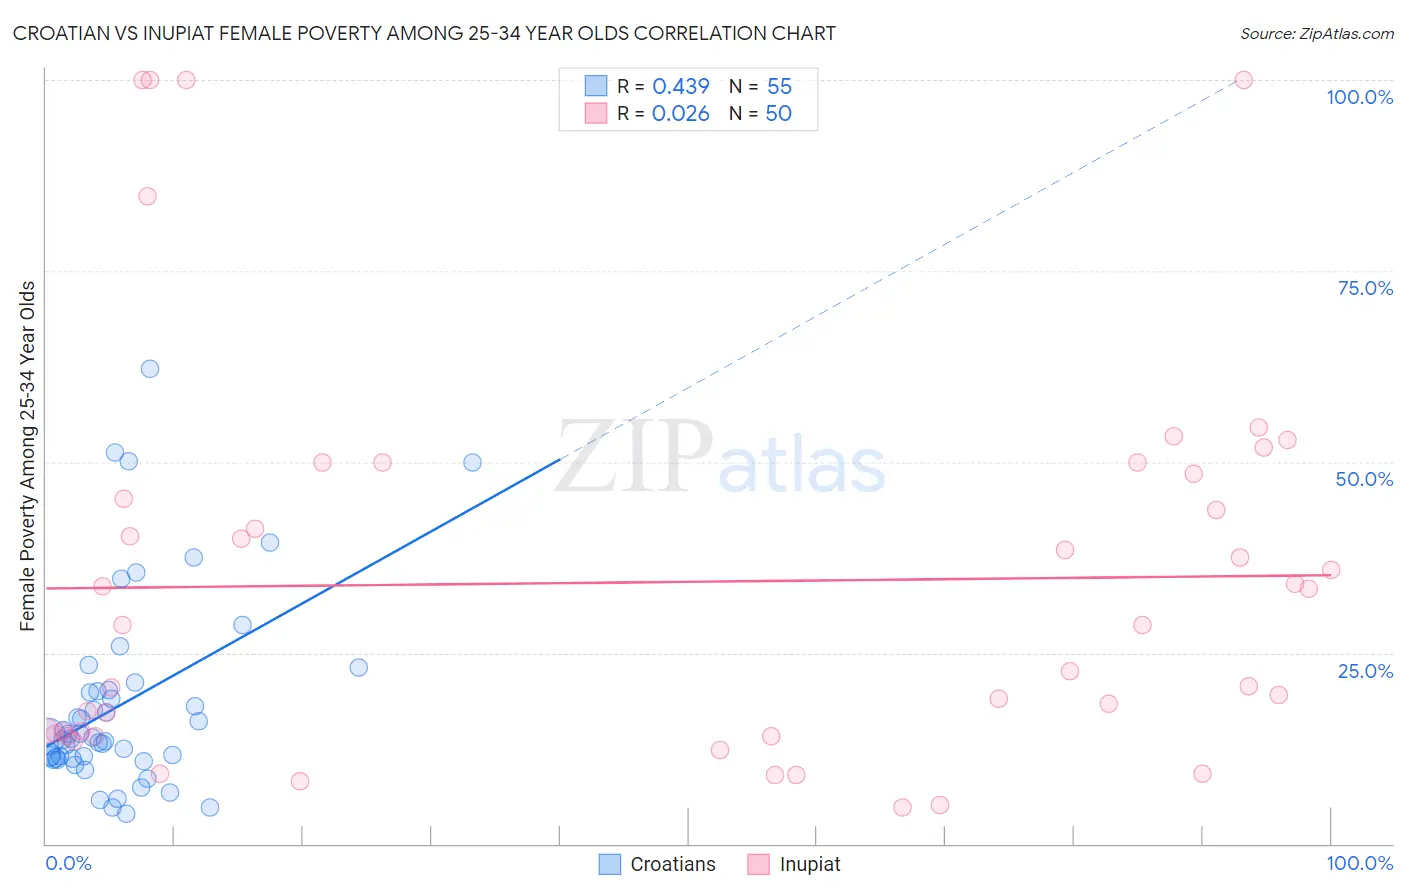 Croatian vs Inupiat Female Poverty Among 25-34 Year Olds